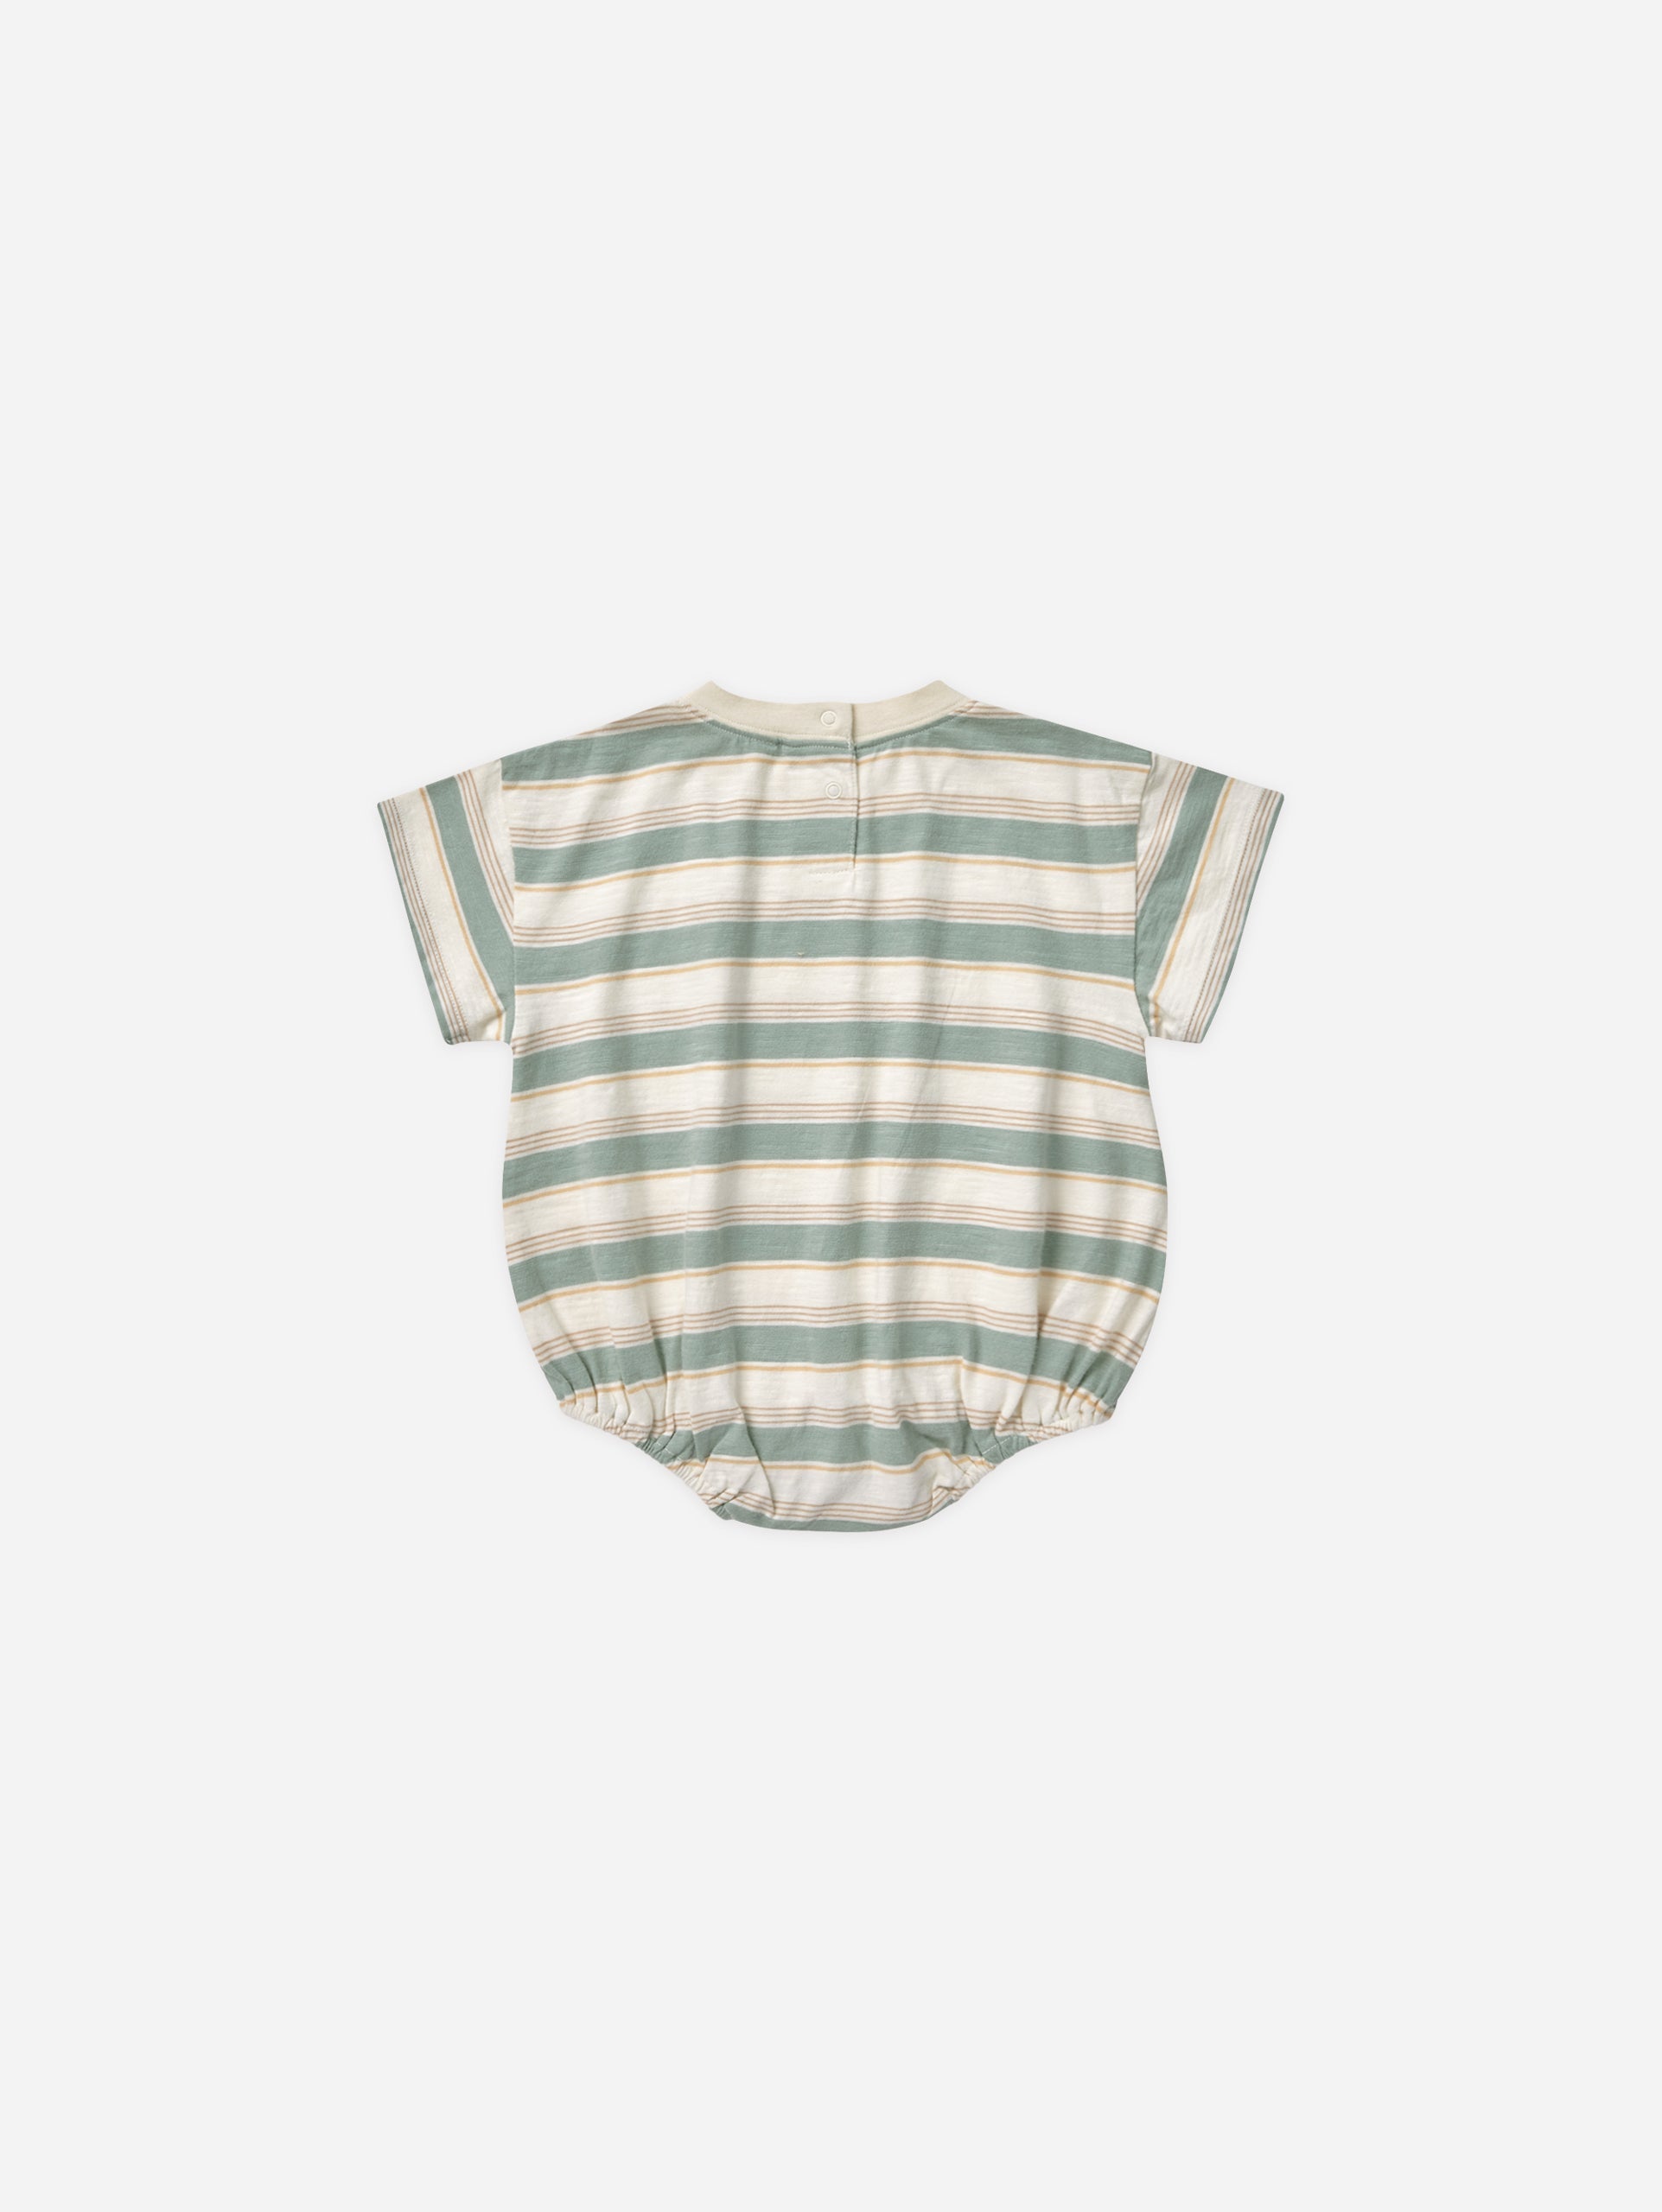 Relaxed Bubble Romper || Aqua Stripe - Rylee + Cru | Kids Clothes | Trendy Baby Clothes | Modern Infant Outfits |